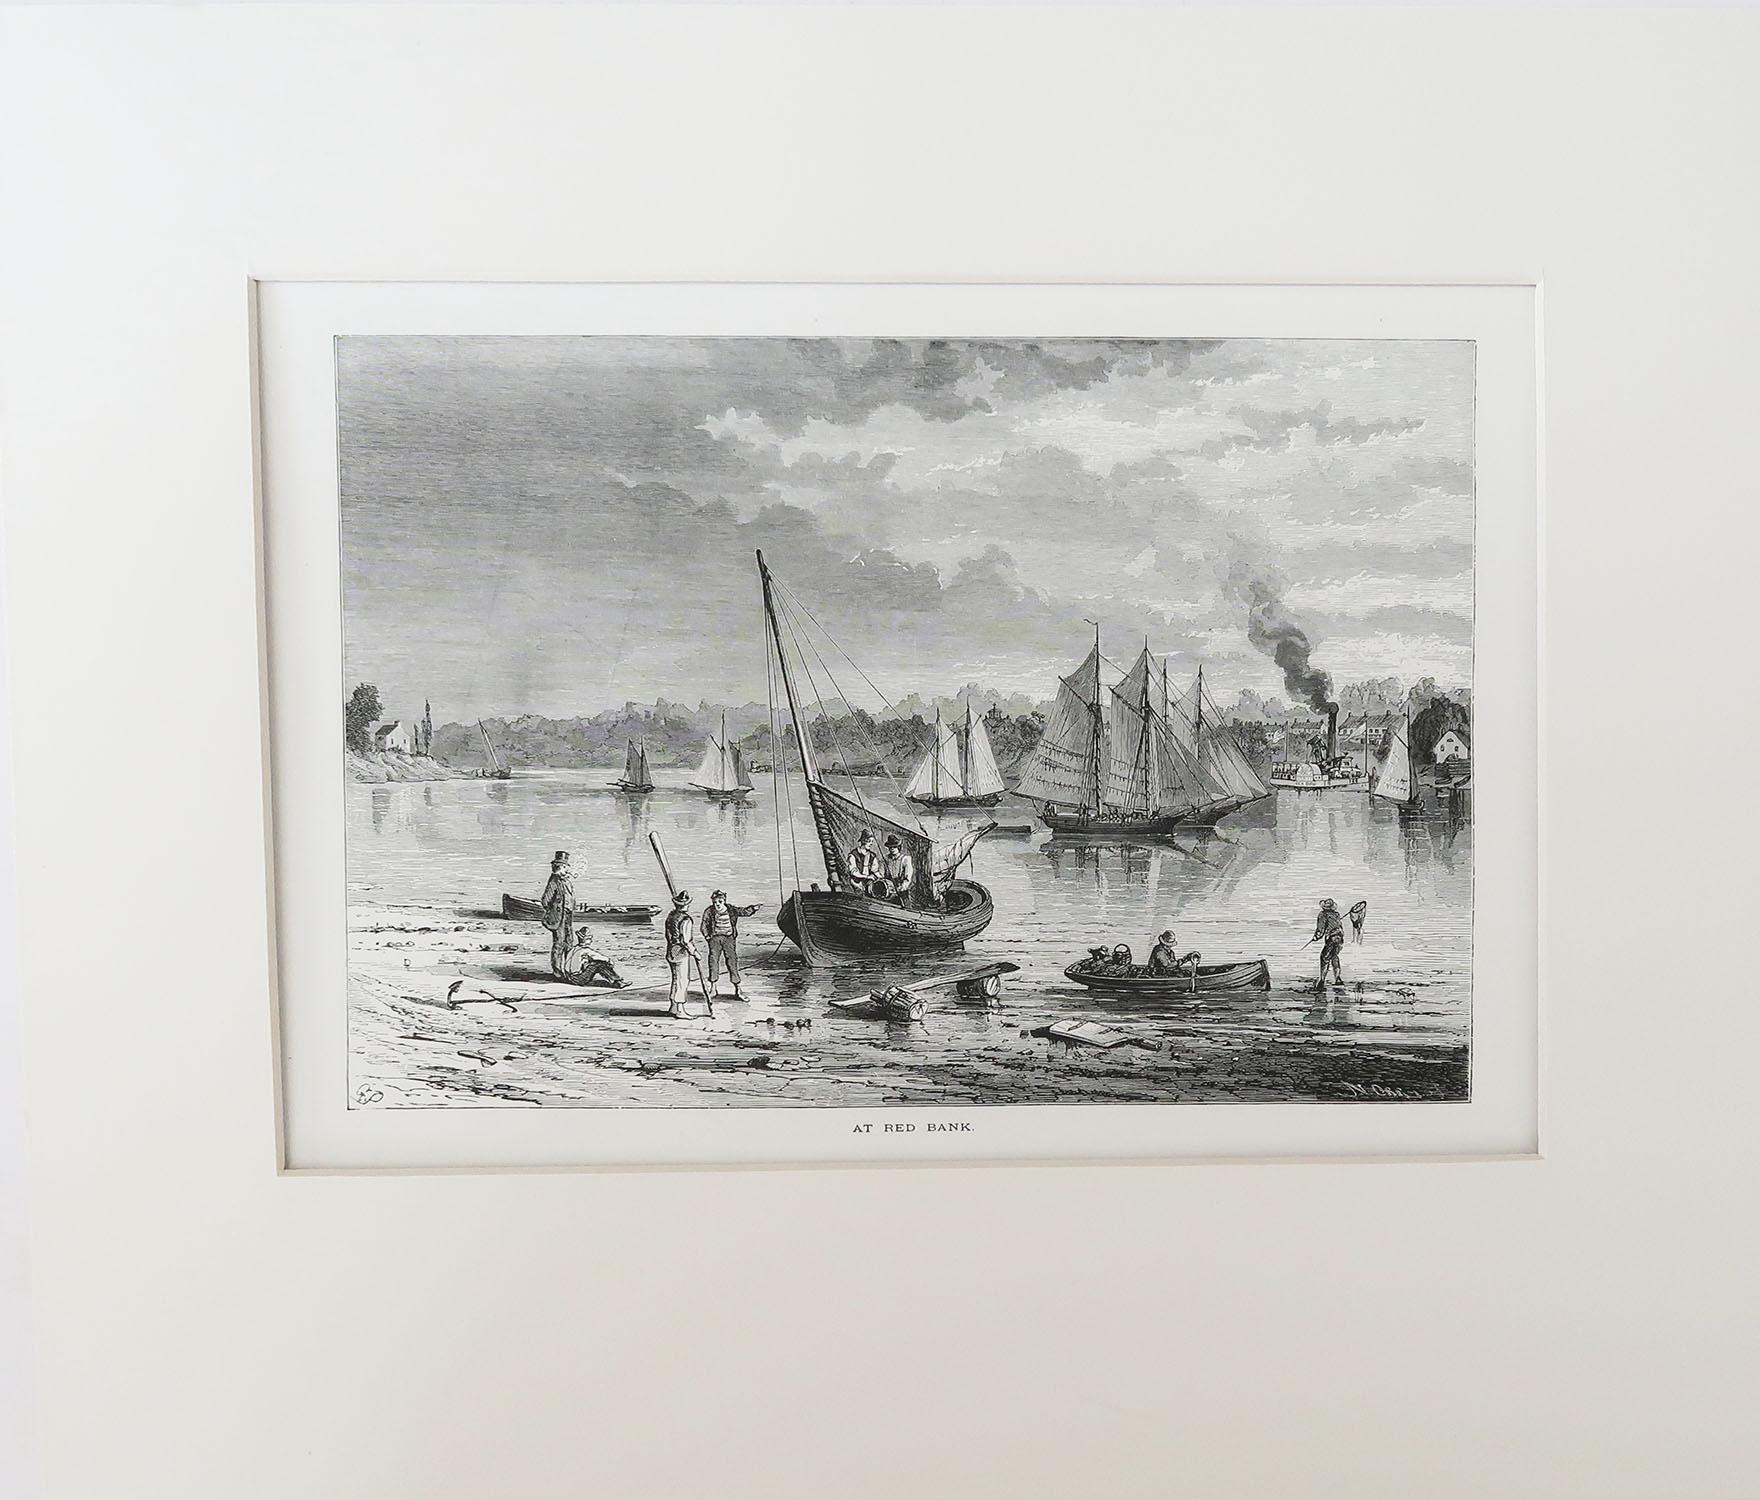 Great print of red bank

Wood-cut engraving after the drawing by Harry Fenn

Published circa 1870

Matted or mounted in cream card

Unframed

The measurement below is the size of the card.   
 